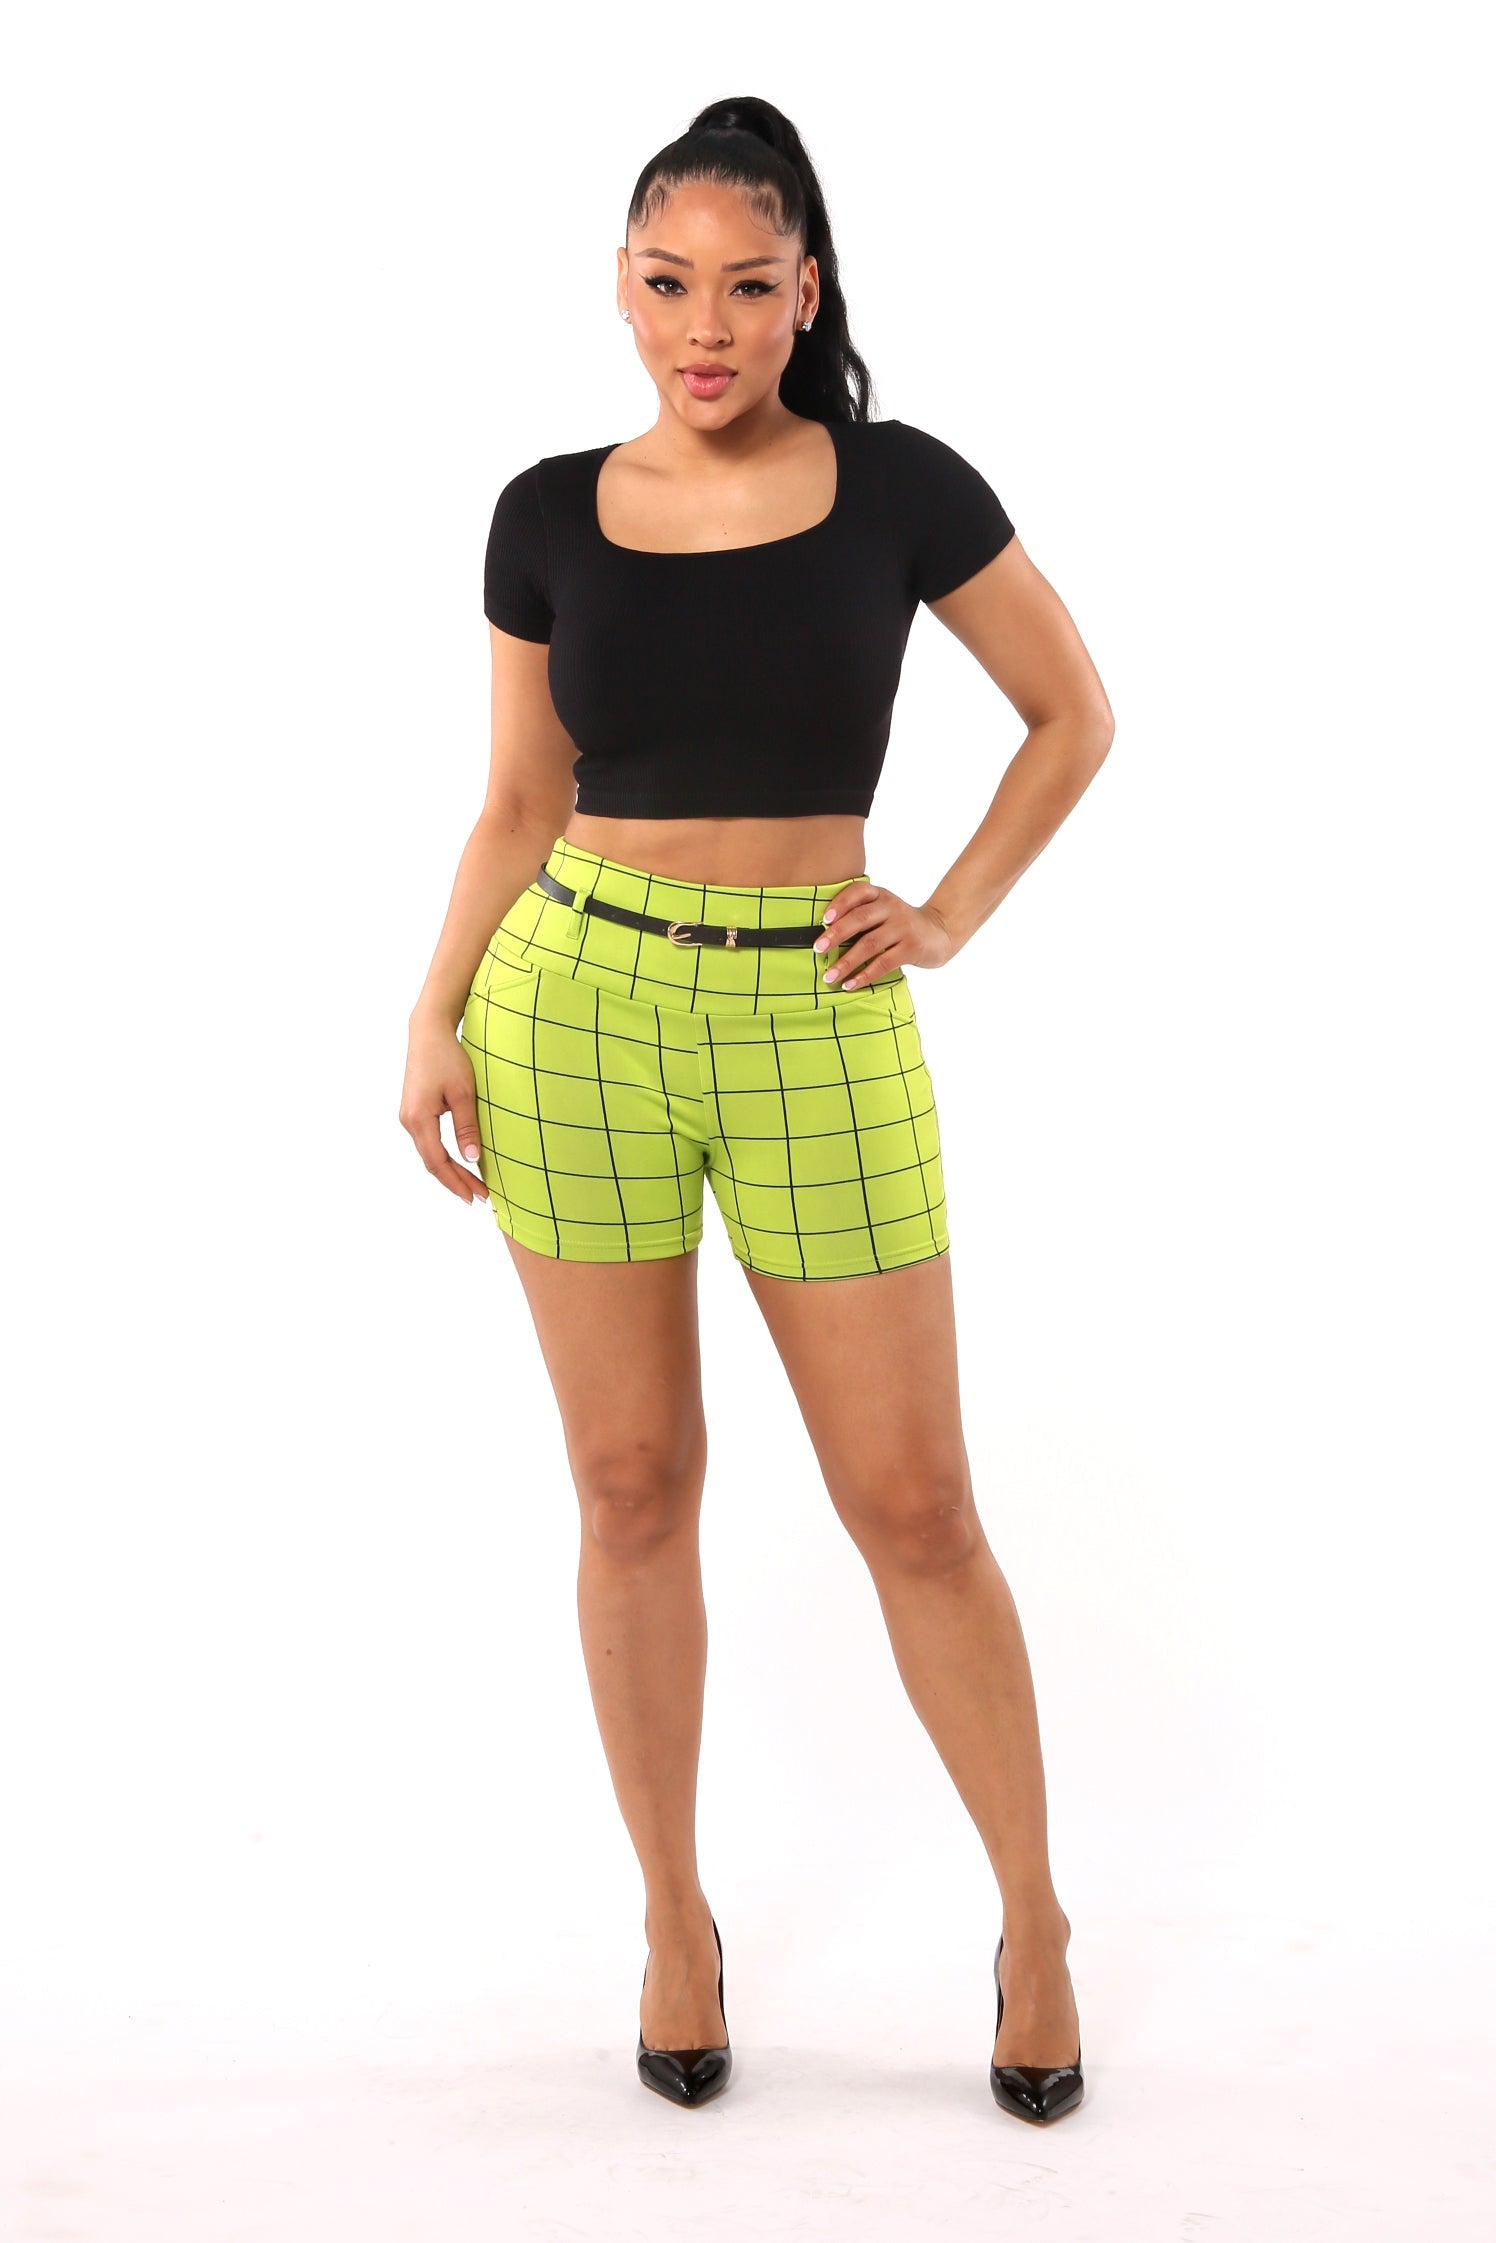 Wholesale Womens High Waist Sculpting Shorts With Faux Leather Belt - Green, Black Plaid - S&G Apparel